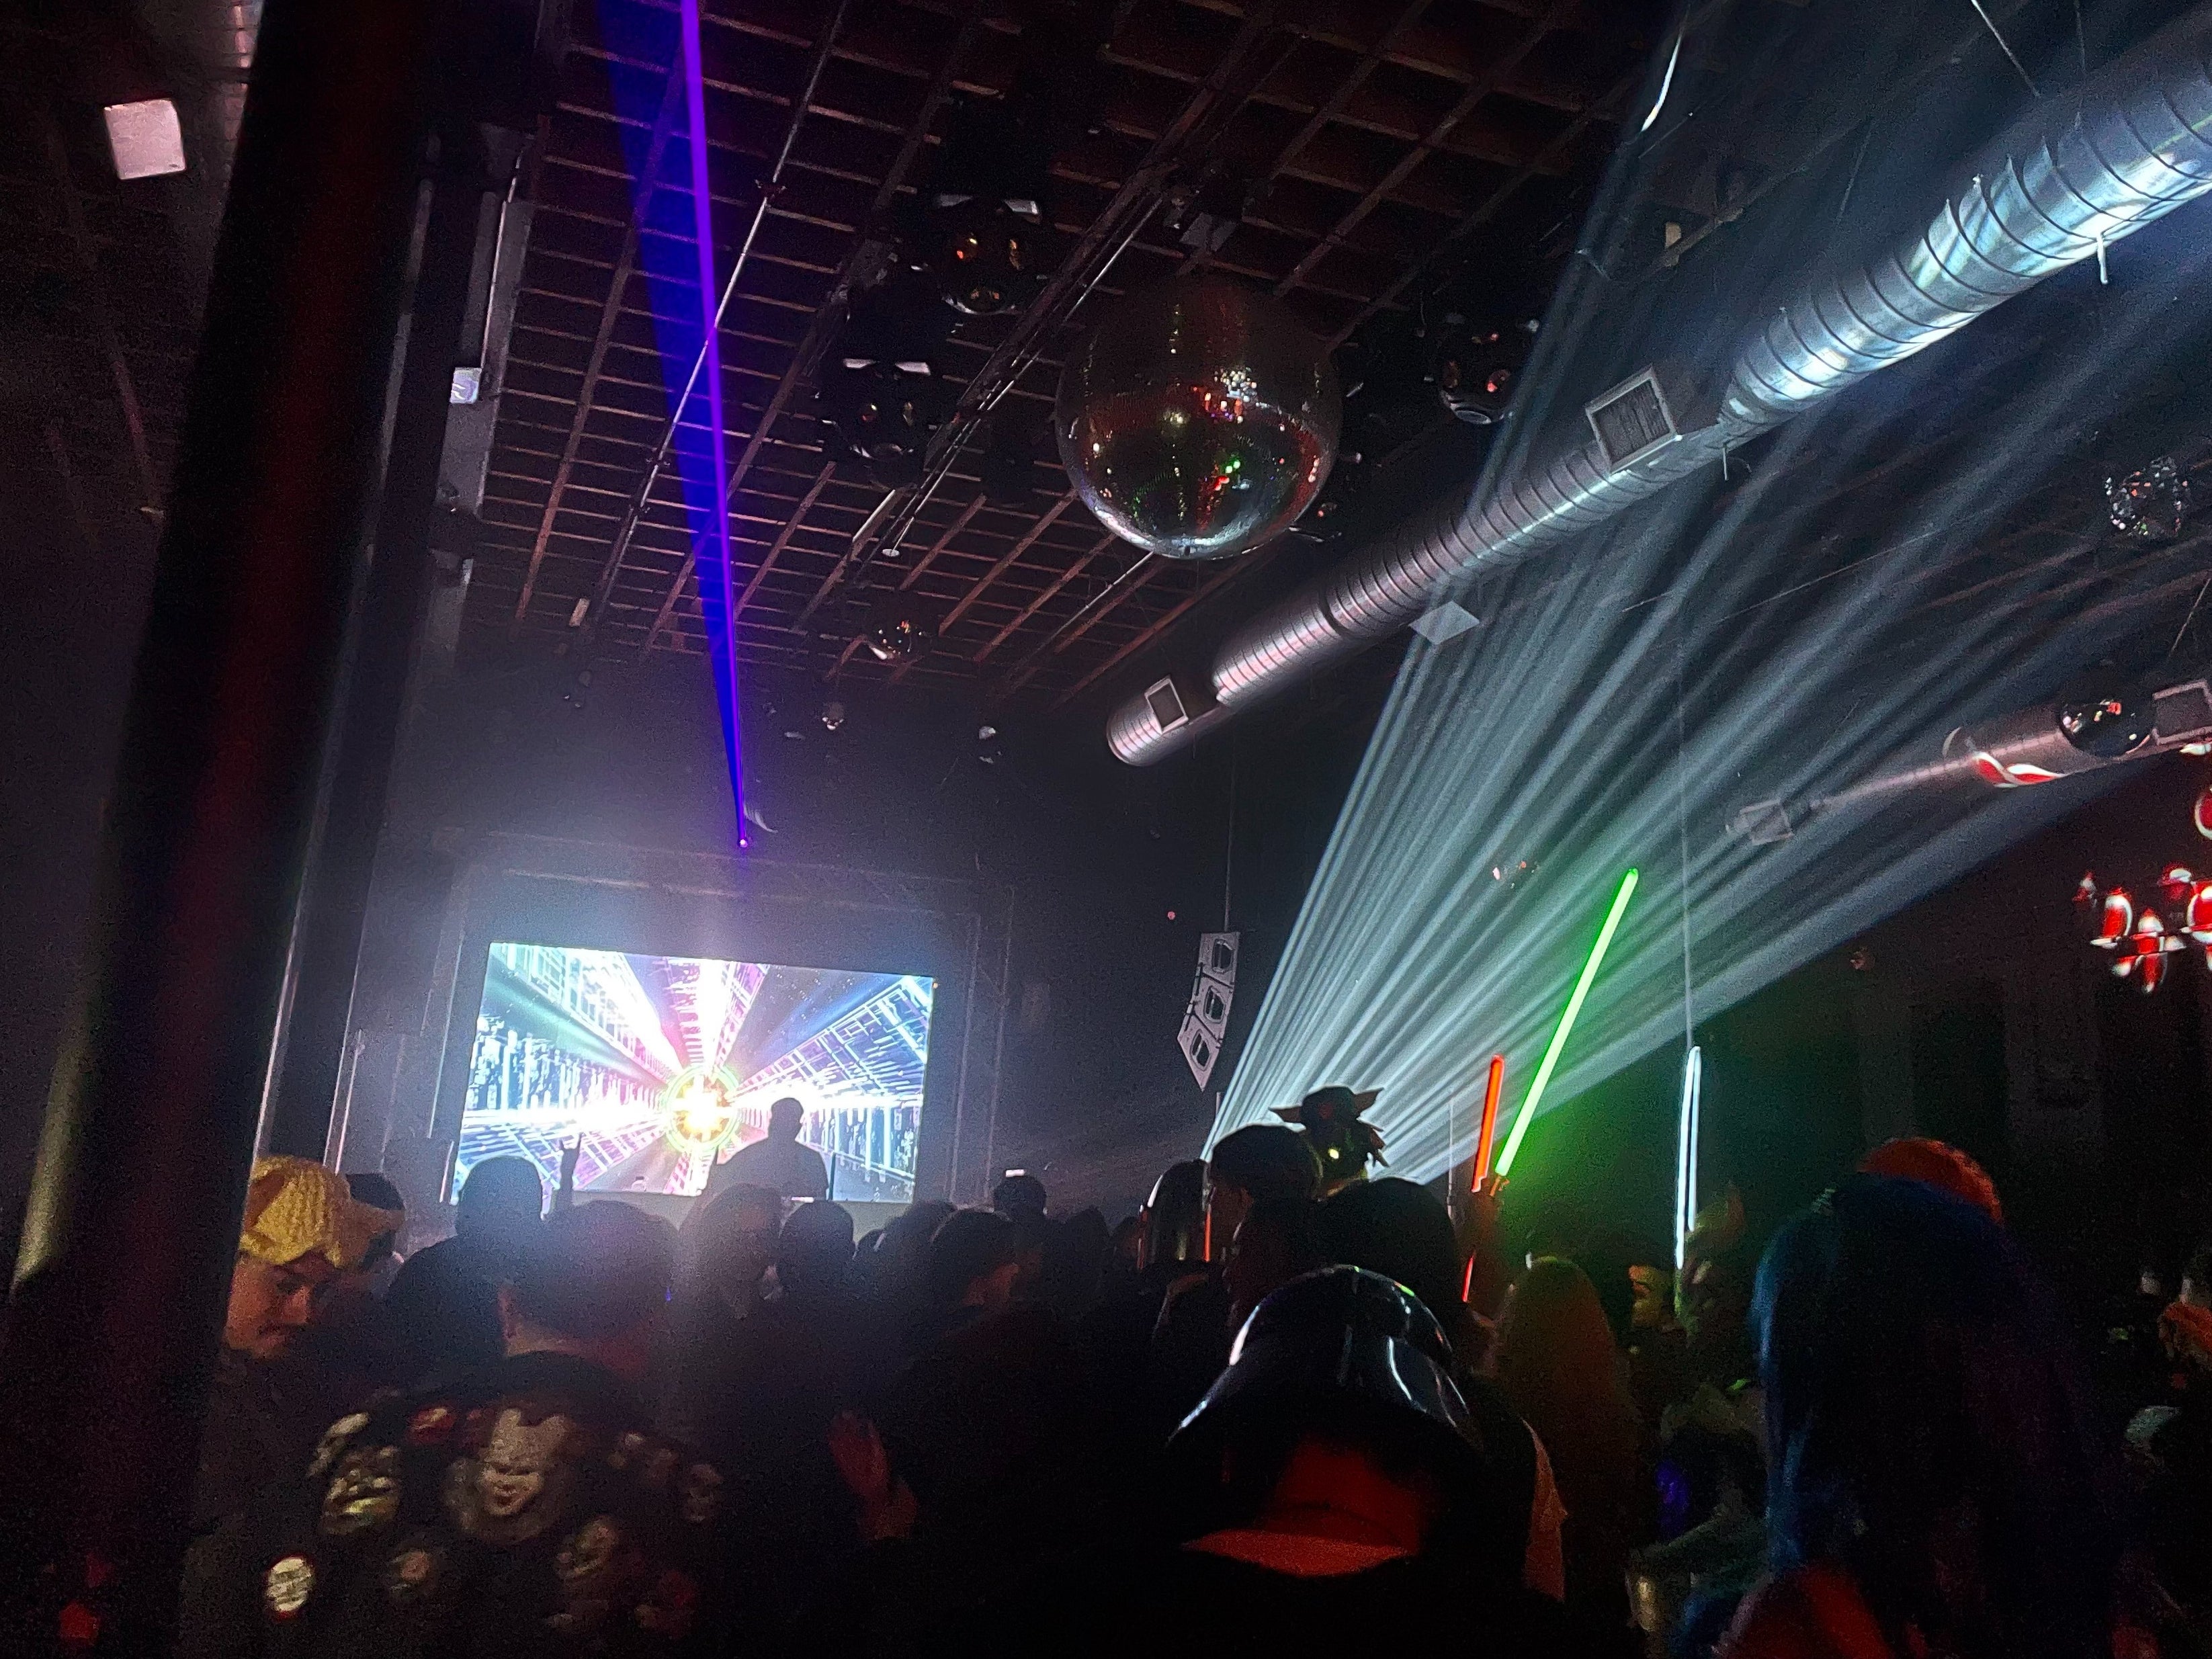 A DJ plays to a warehouse full of ‘Star Wars’ fans